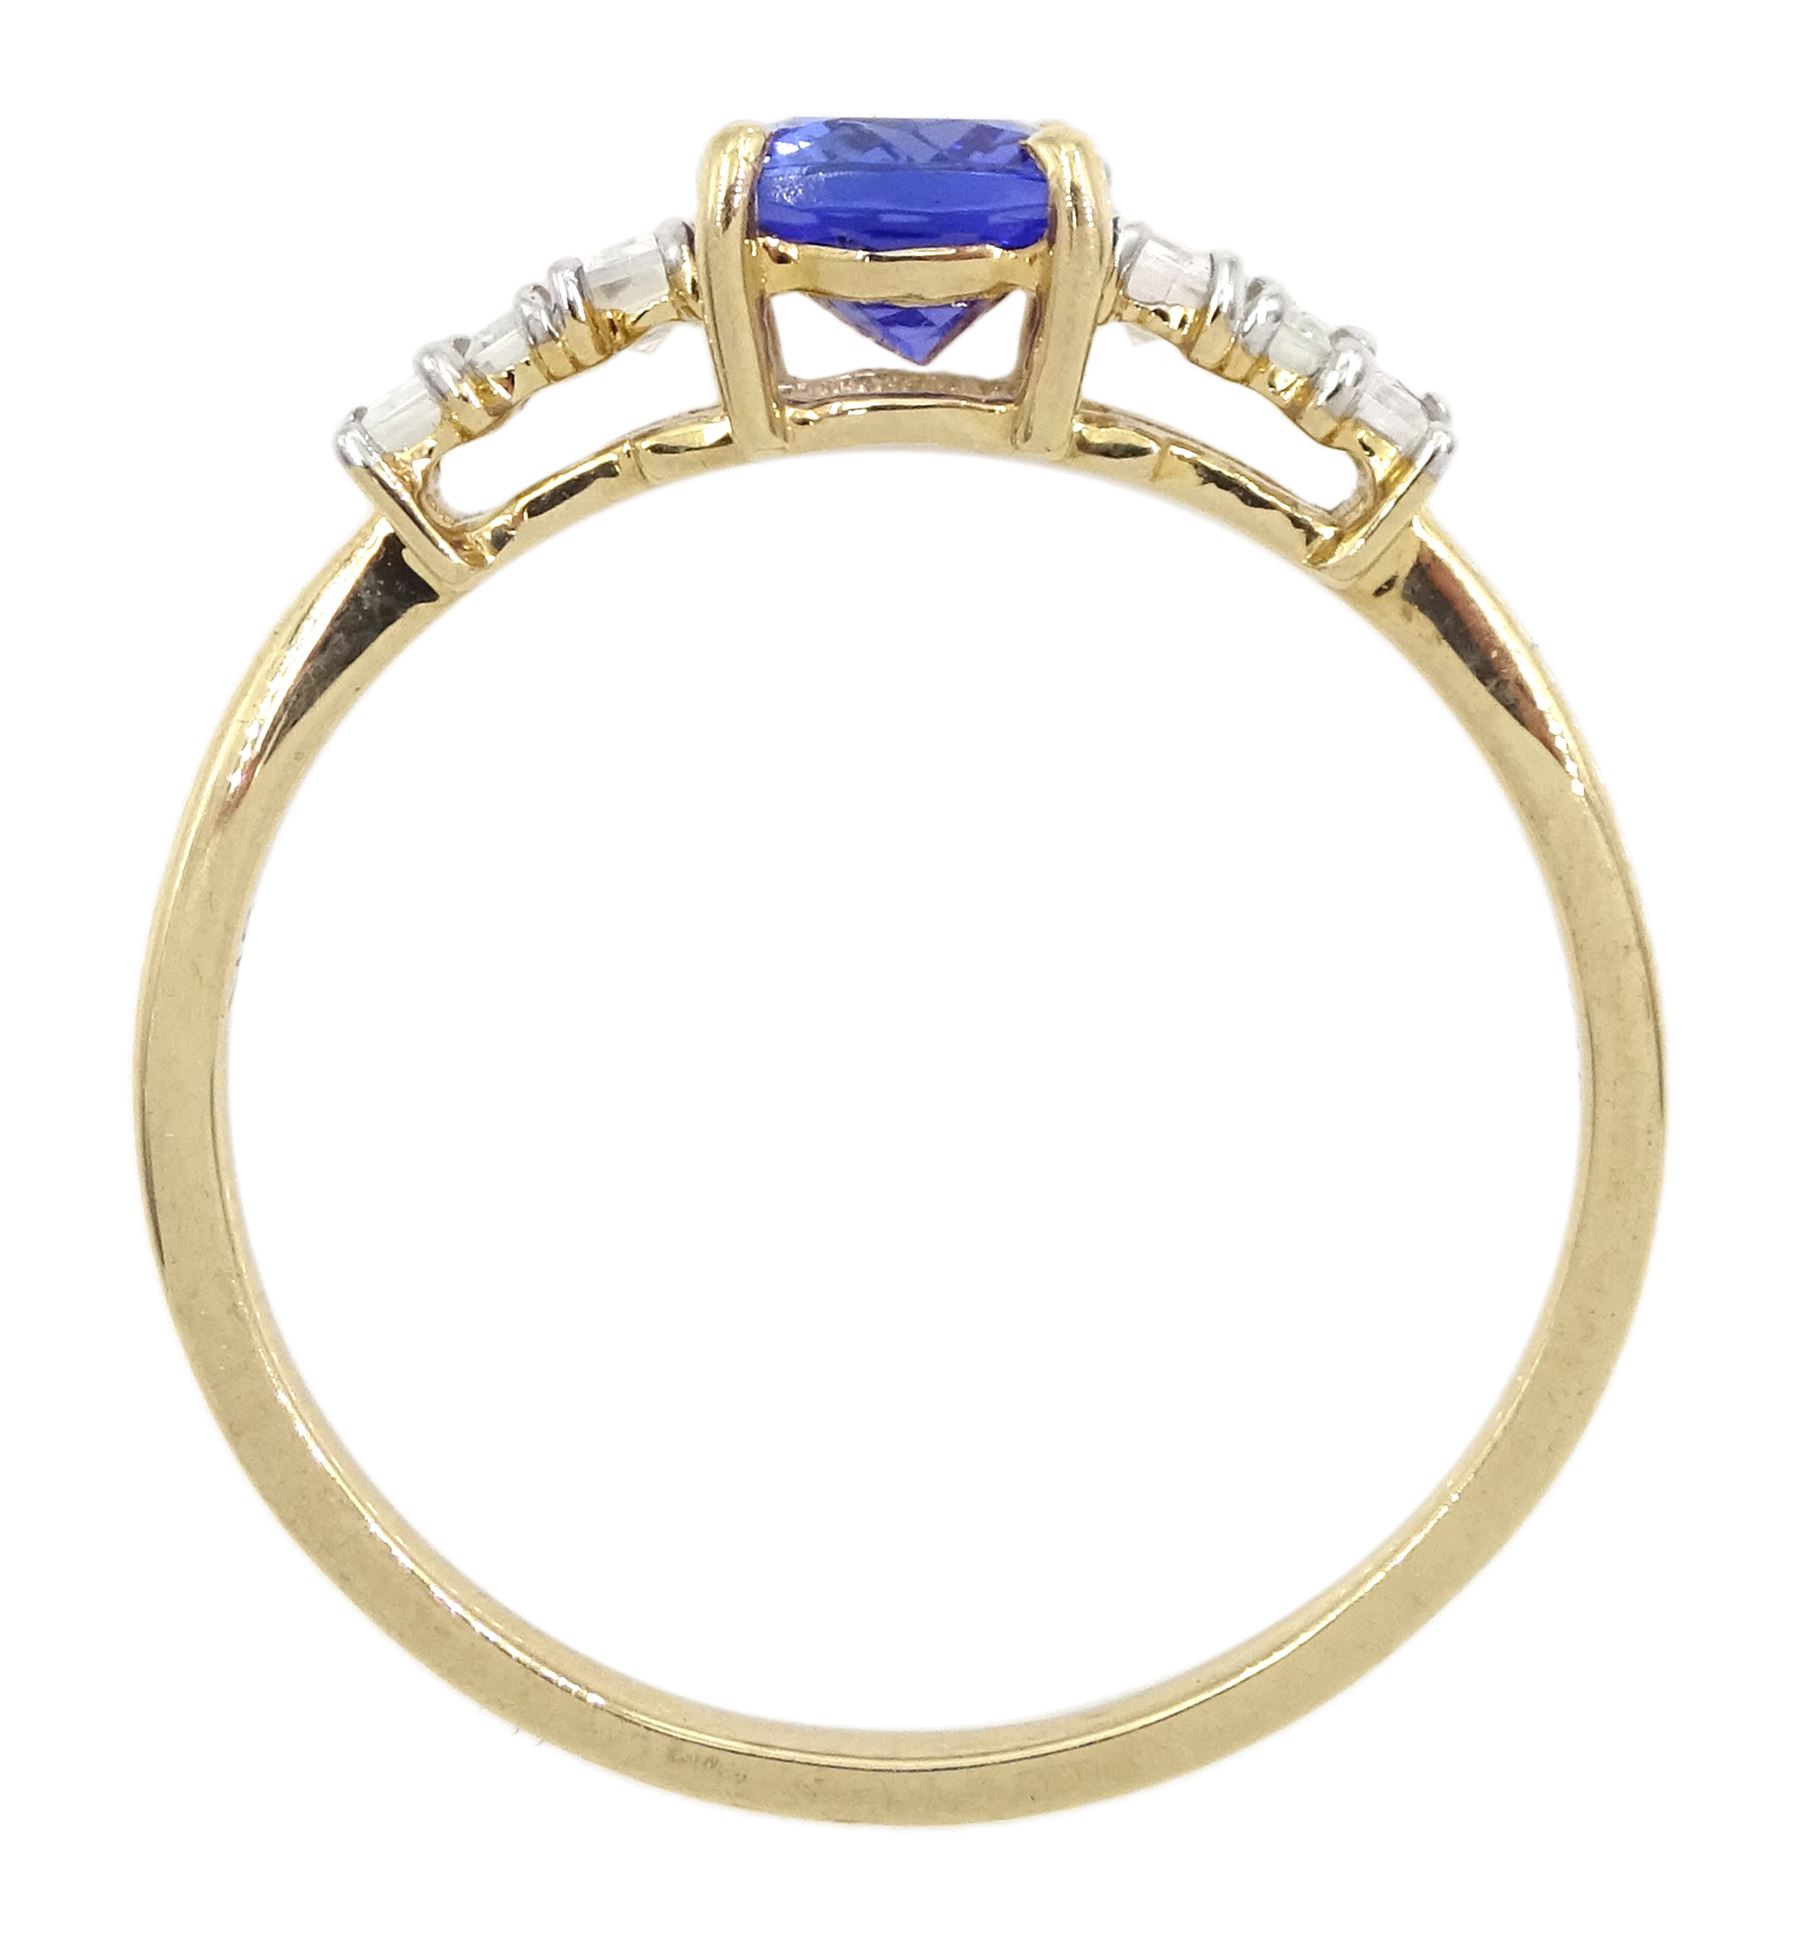 9ct gold cushion cut tanzanite and baguette cut white zircon ring - Image 4 of 4